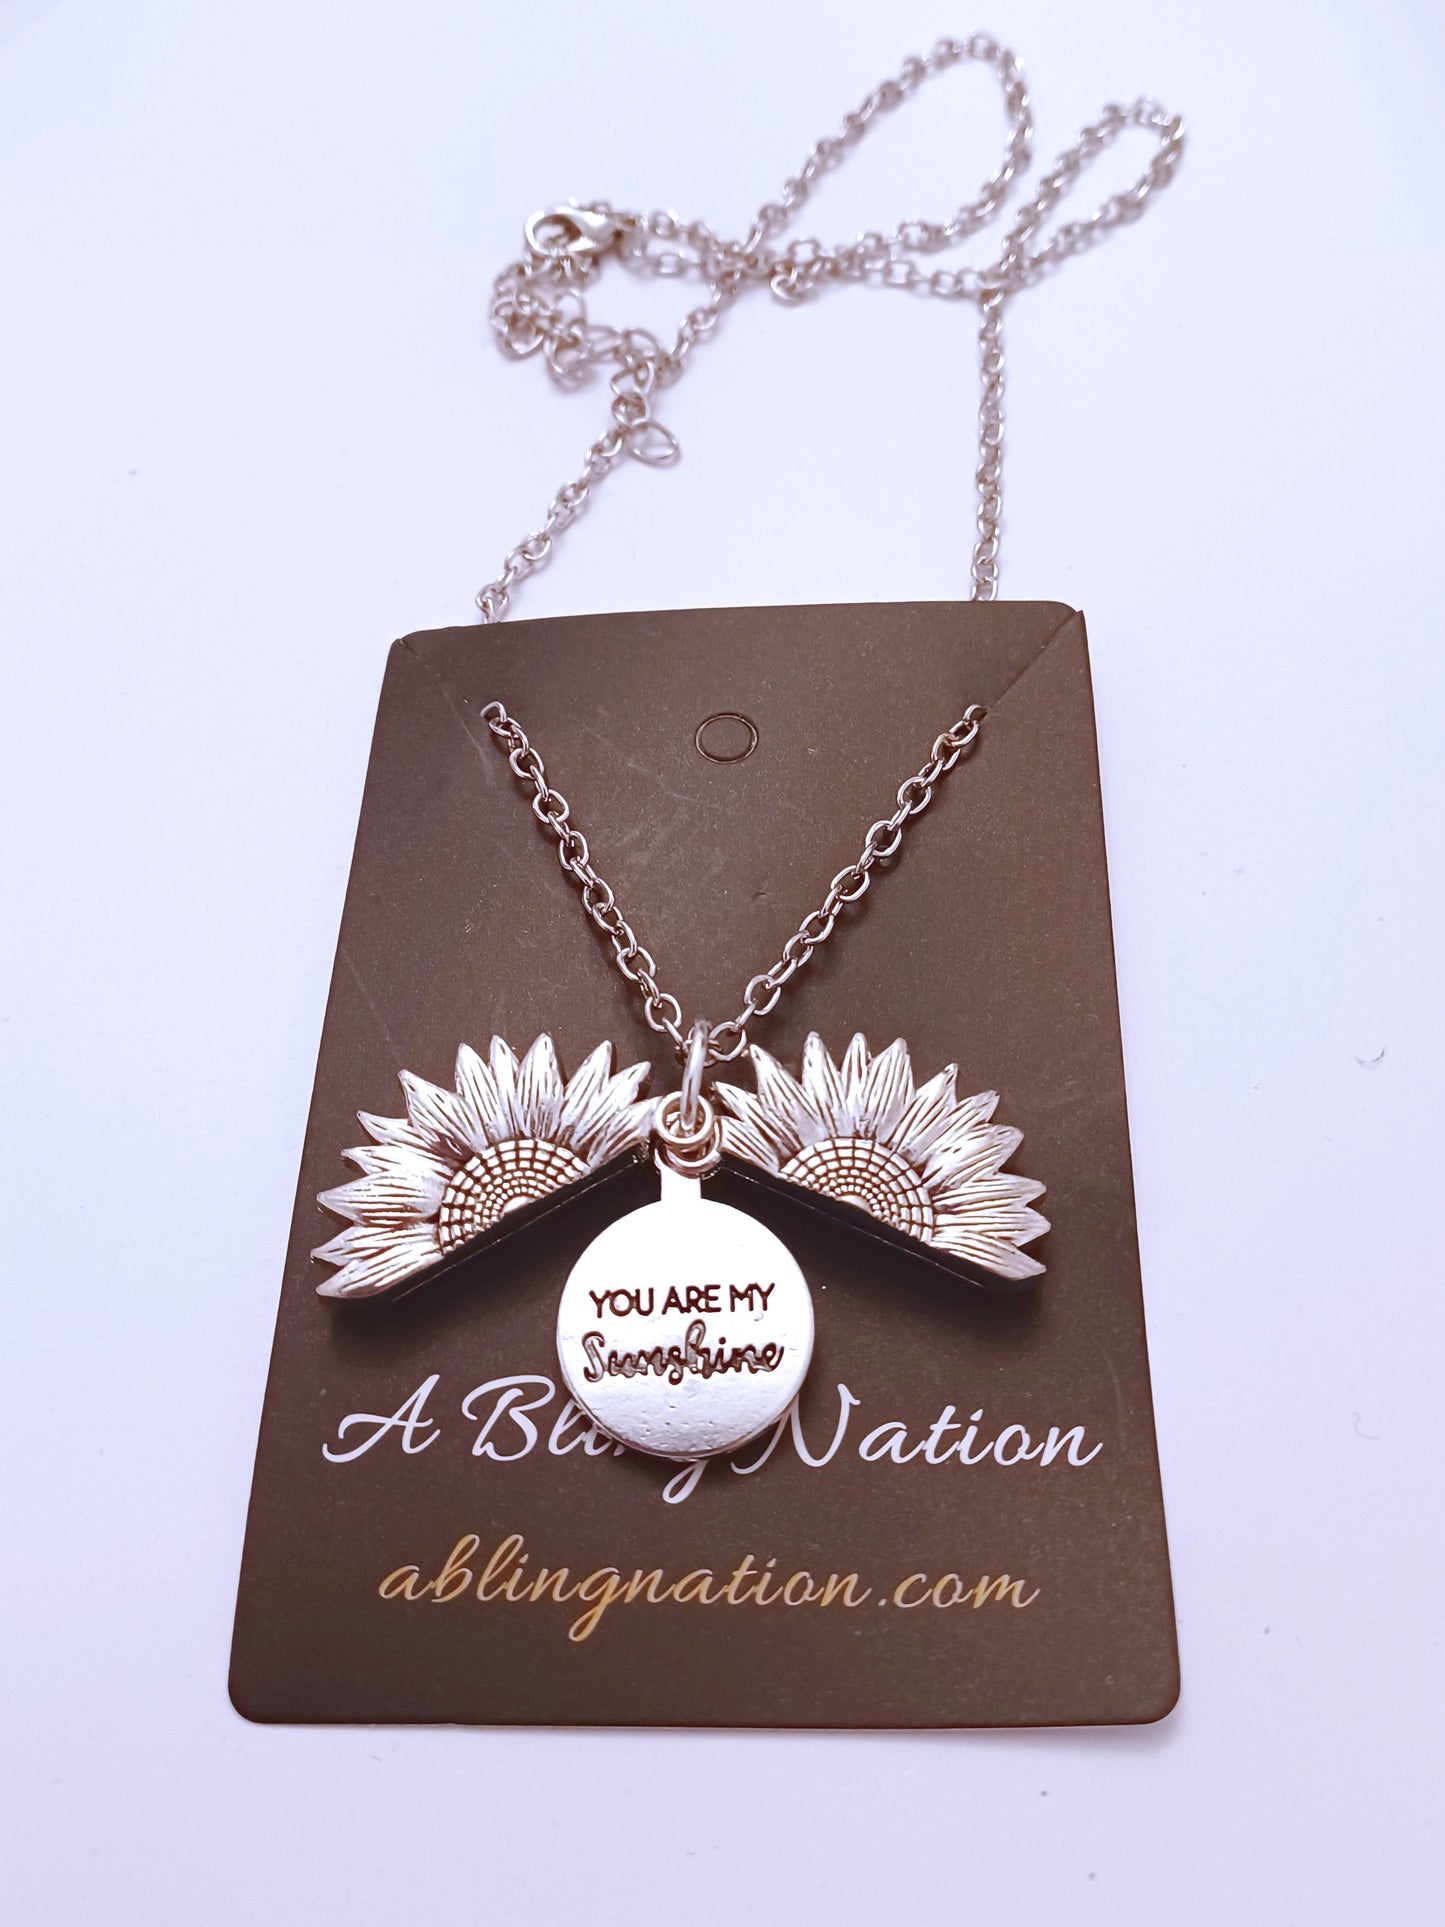 Sunflower Pendant on Silver Chain Necklace